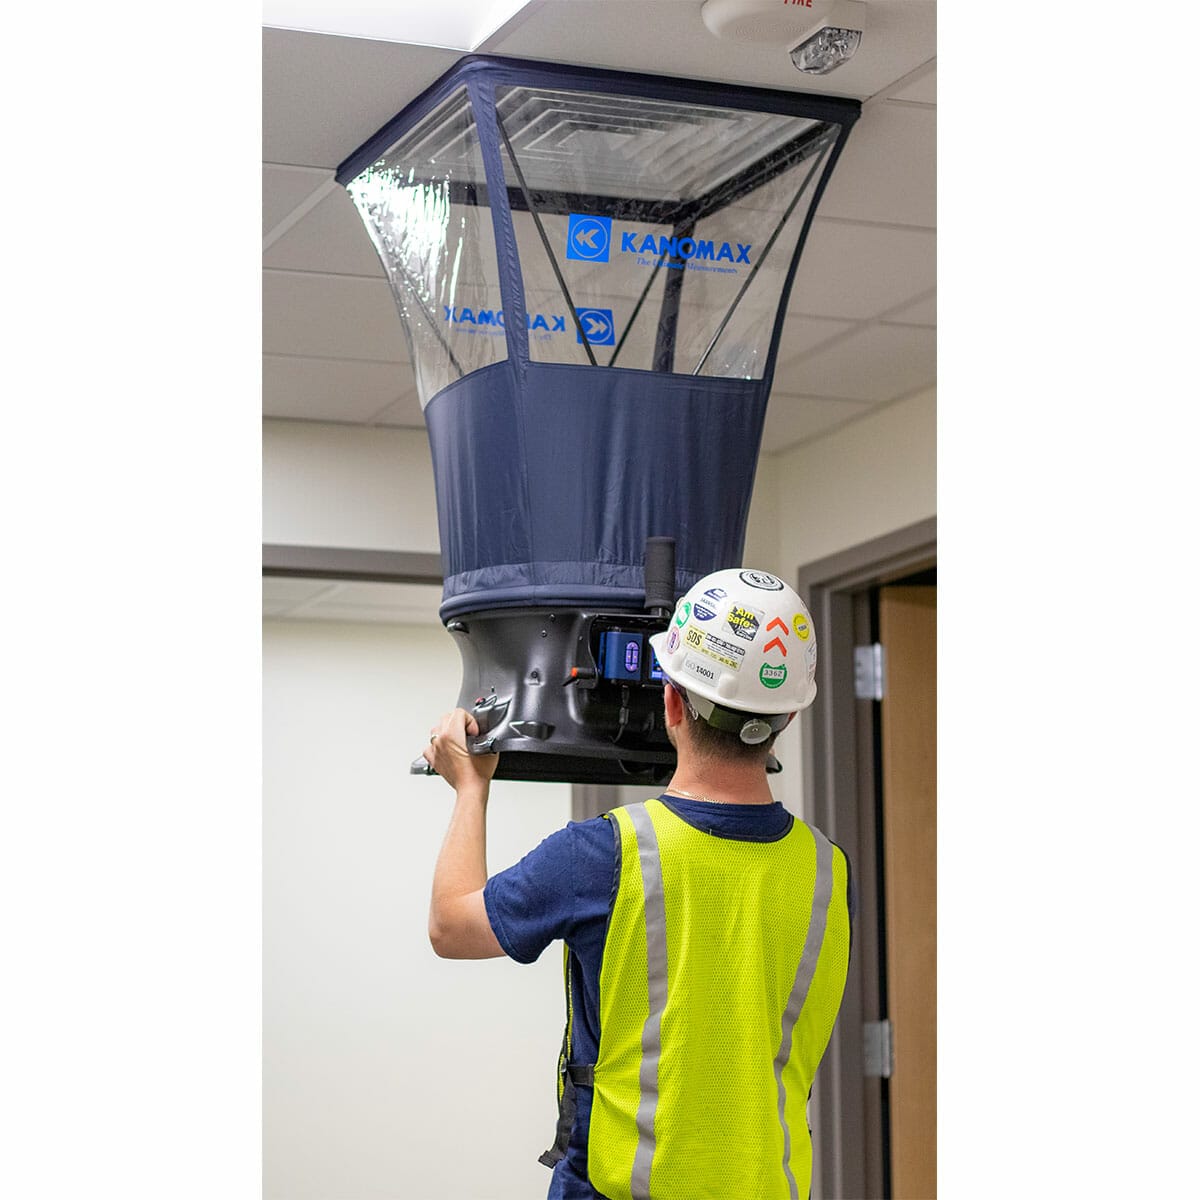 TABmaster Airflow Capture Hood - Model 6715 Used in Facility